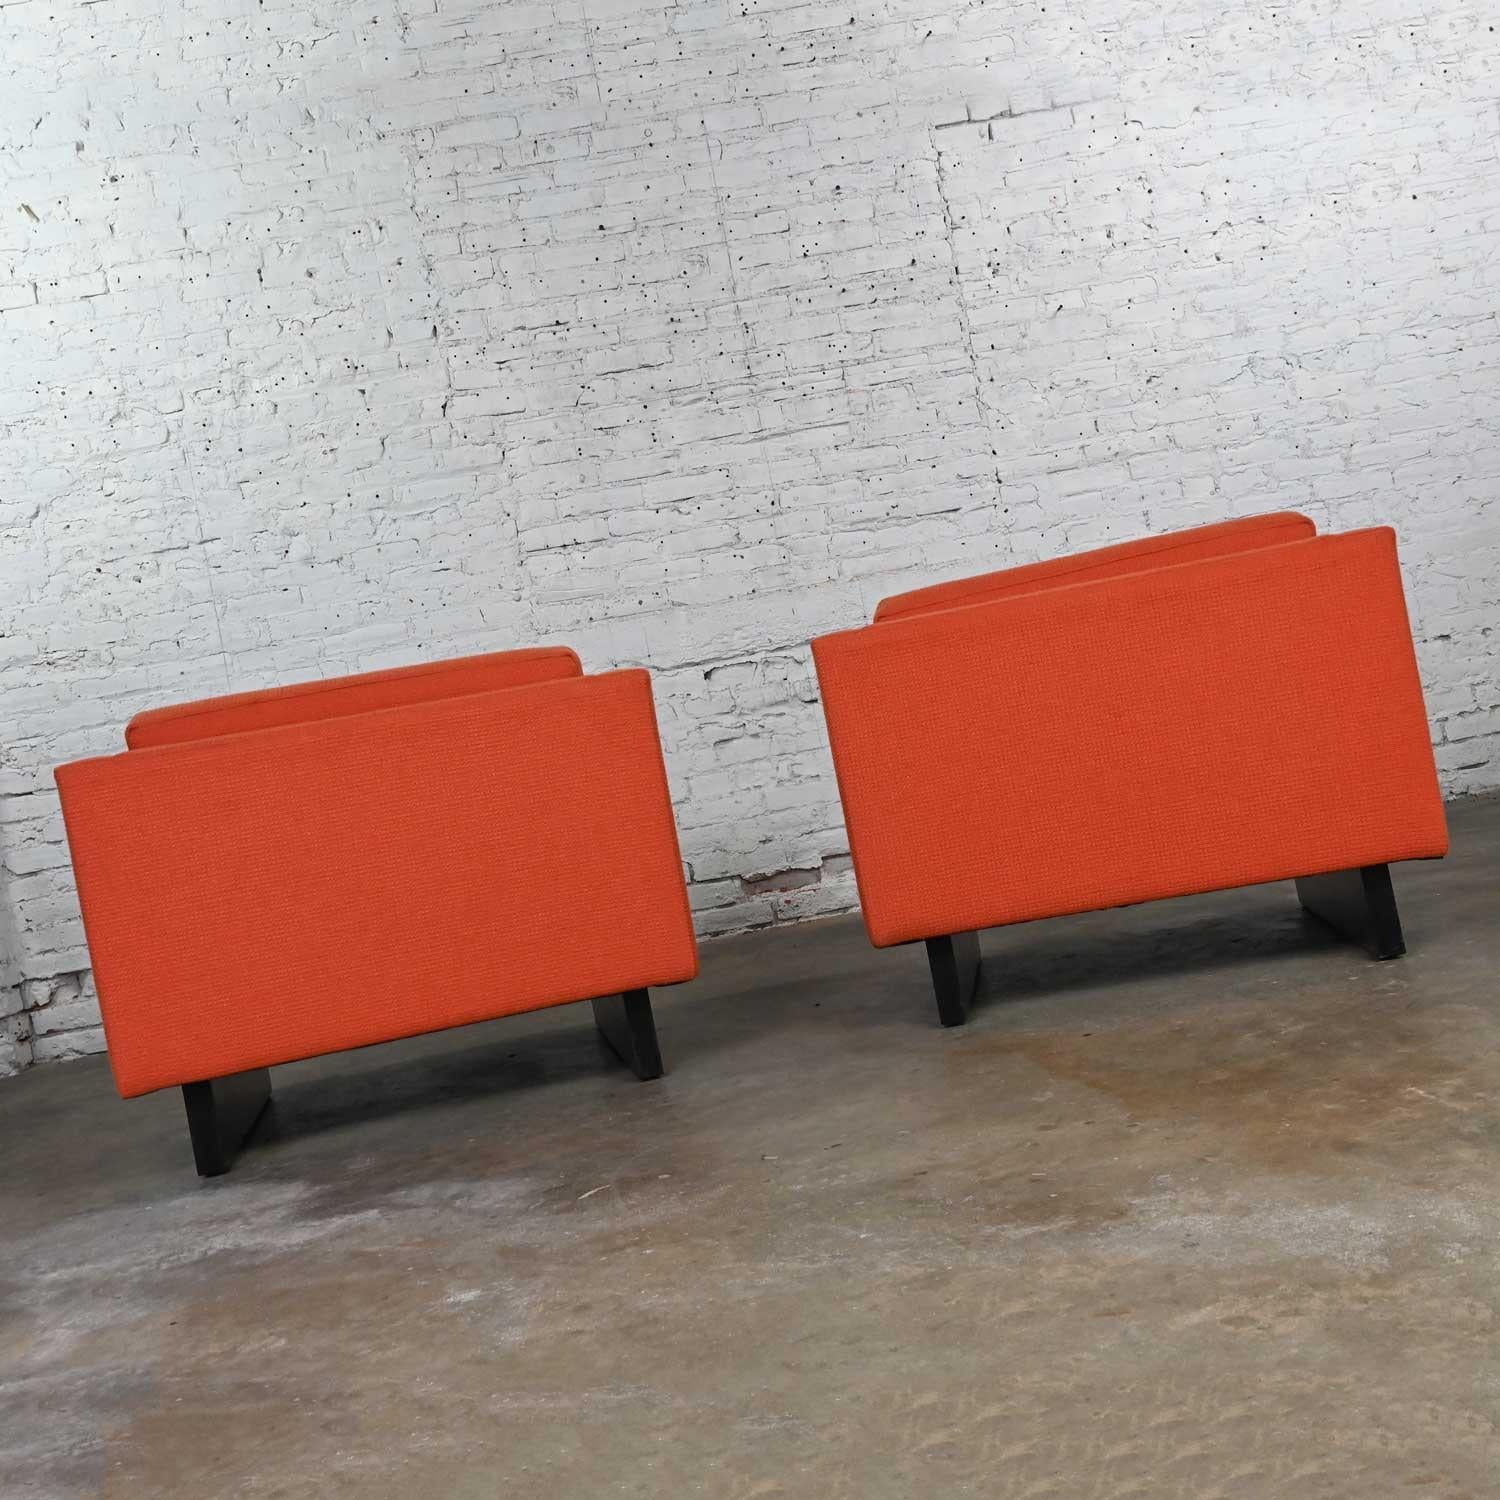 1970s Mcm to Modern Harvey Probber Club Chairs Orange 1571 Tuxedo Sleigh Bases For Sale 1